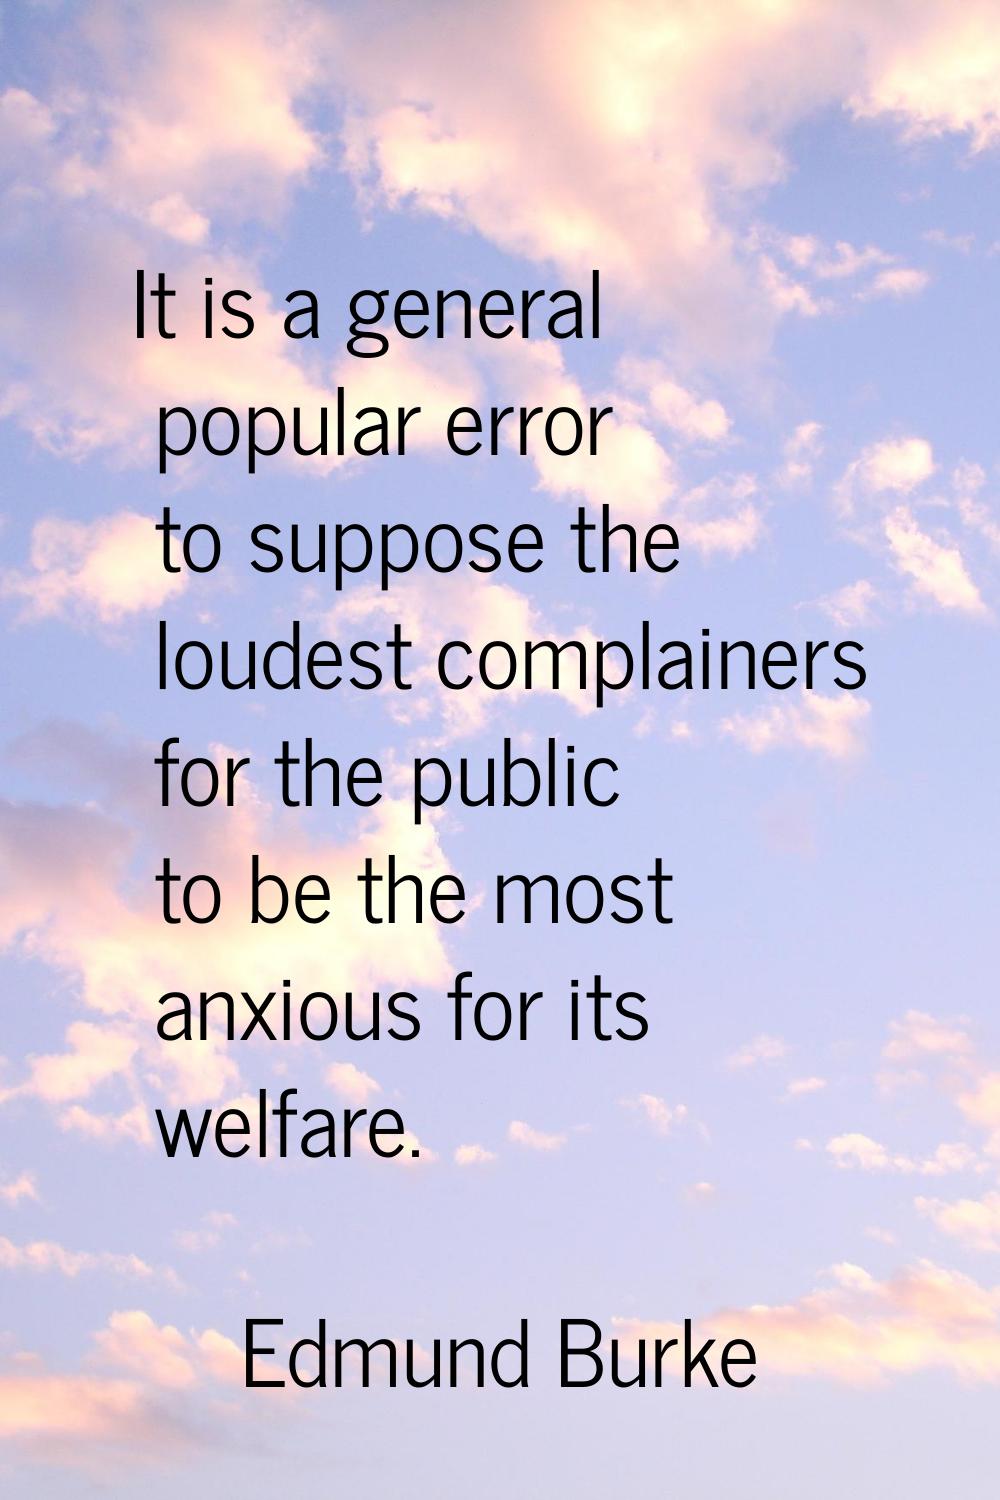 It is a general popular error to suppose the loudest complainers for the public to be the most anxi